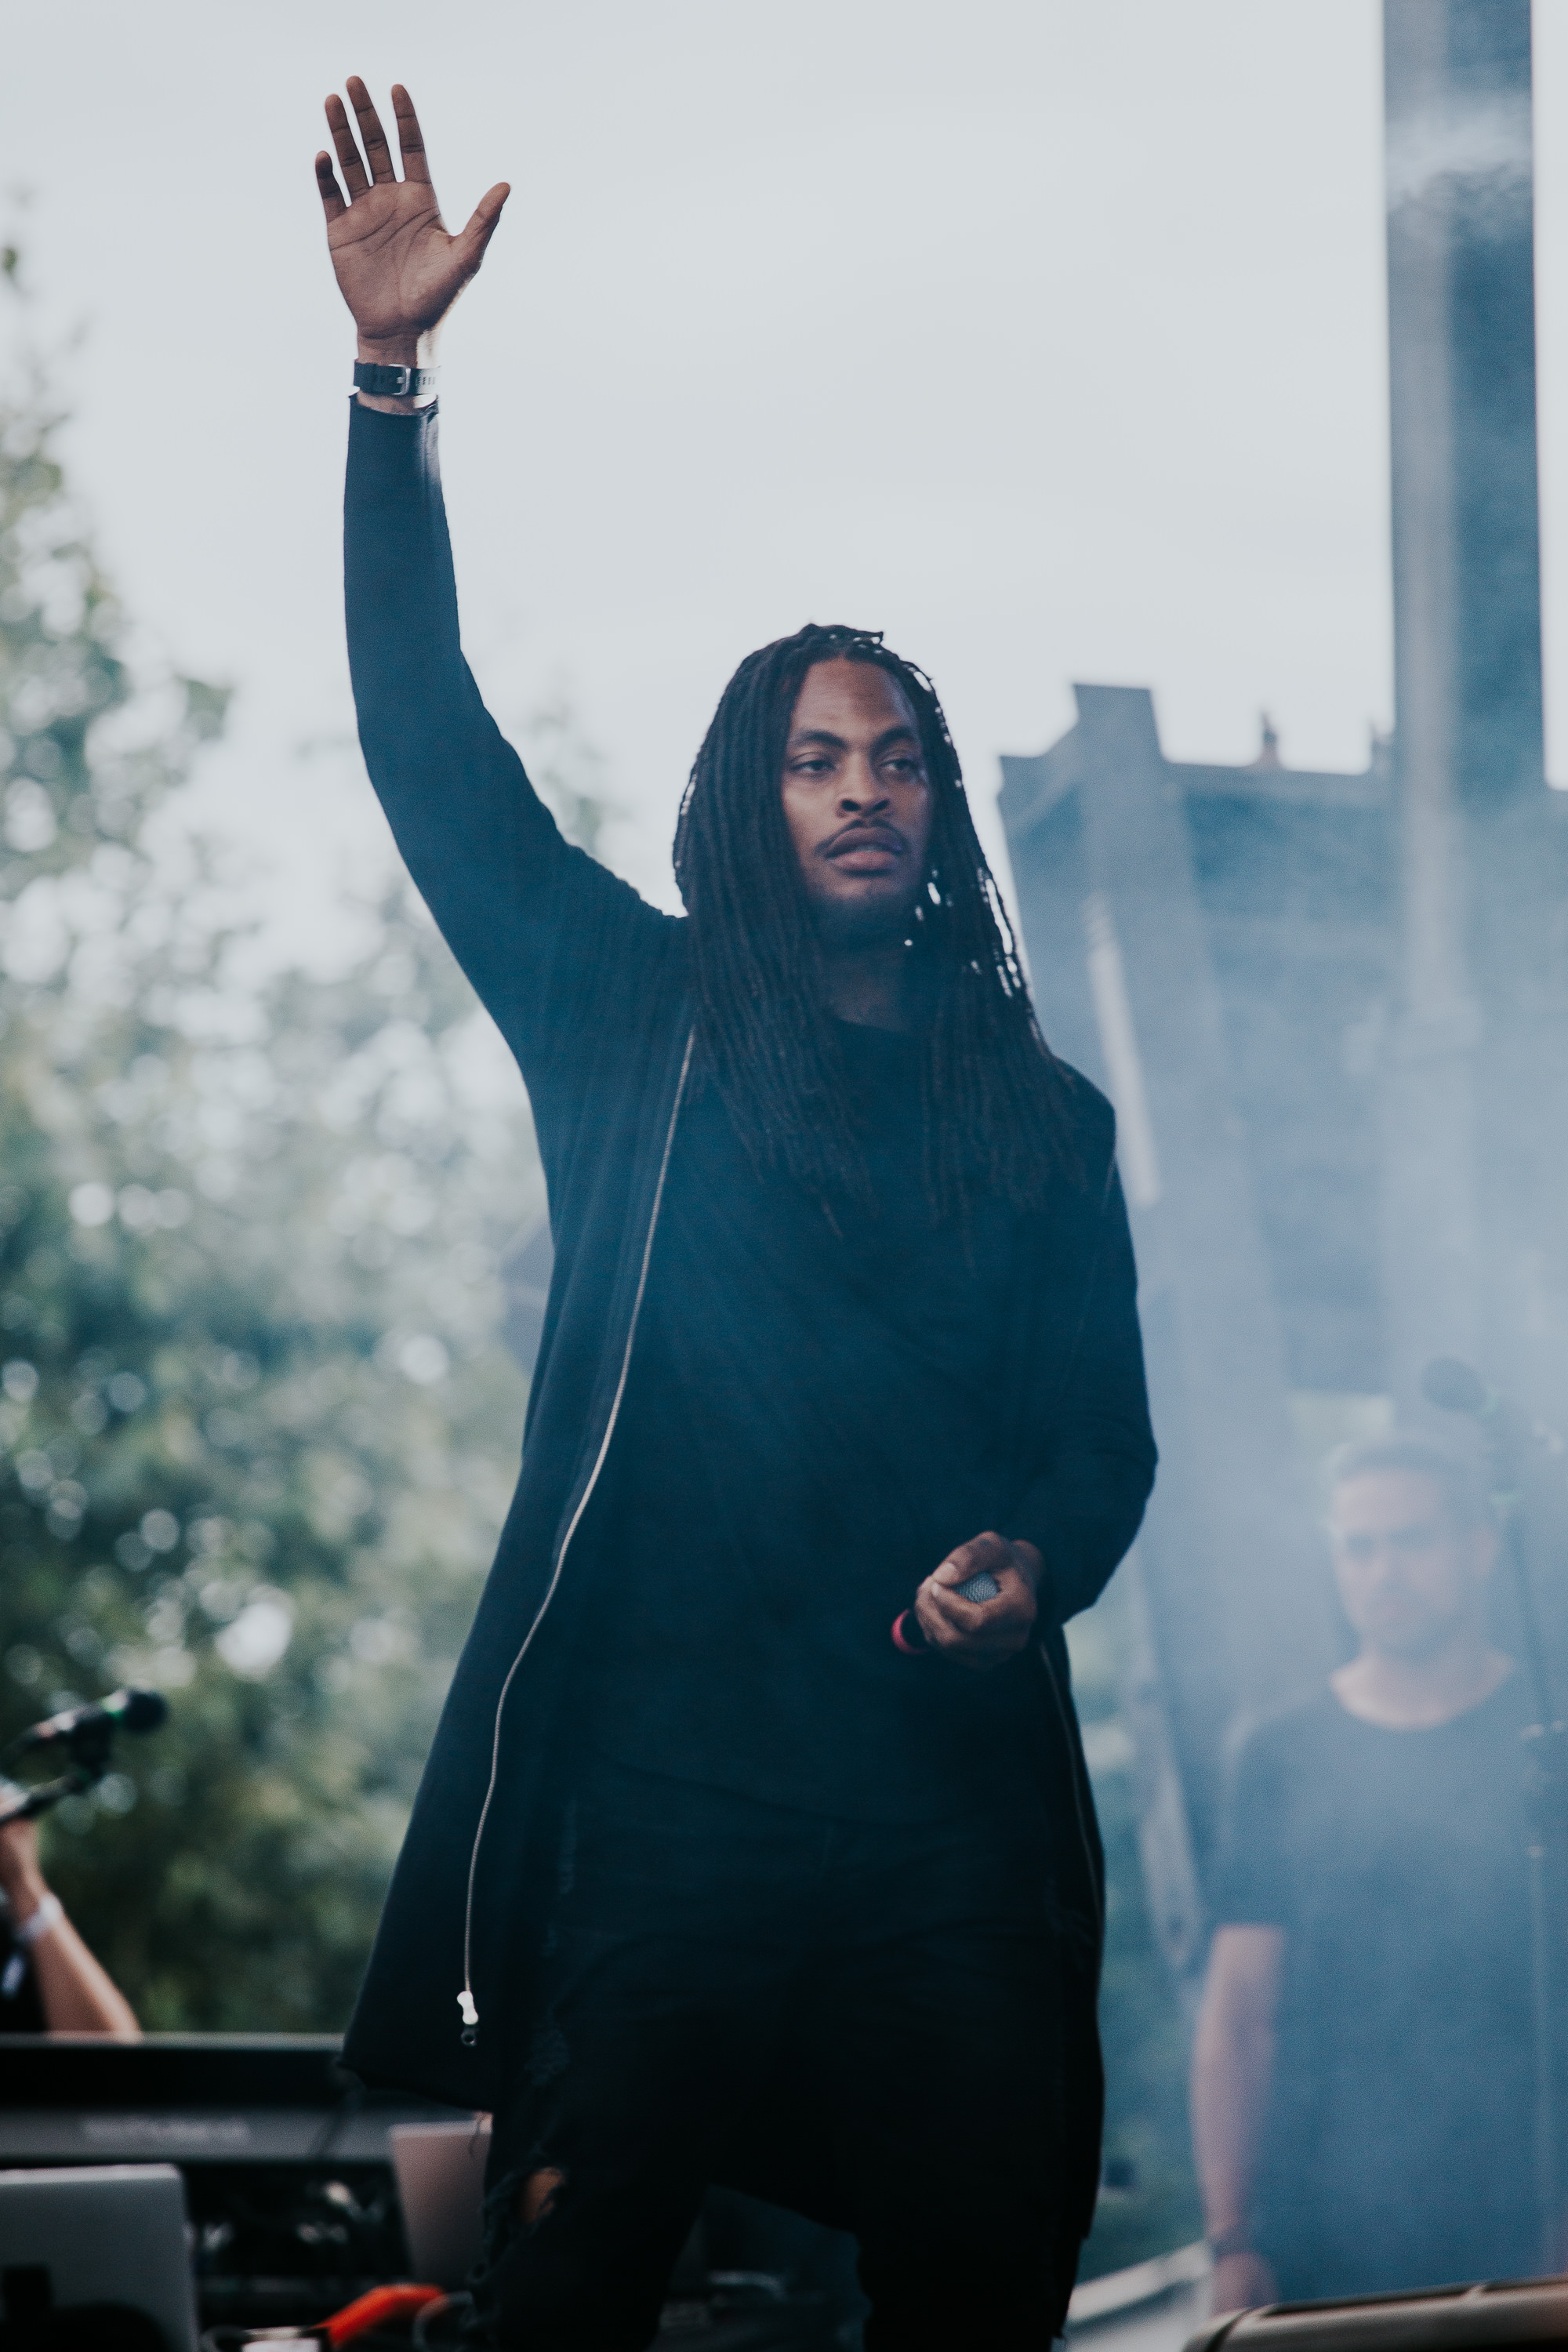 7_Belly_Waka_Flocka_Flame_Holland_Park_FVDED_Timothy_Nguyen_20160702 (8 of 13).jpg